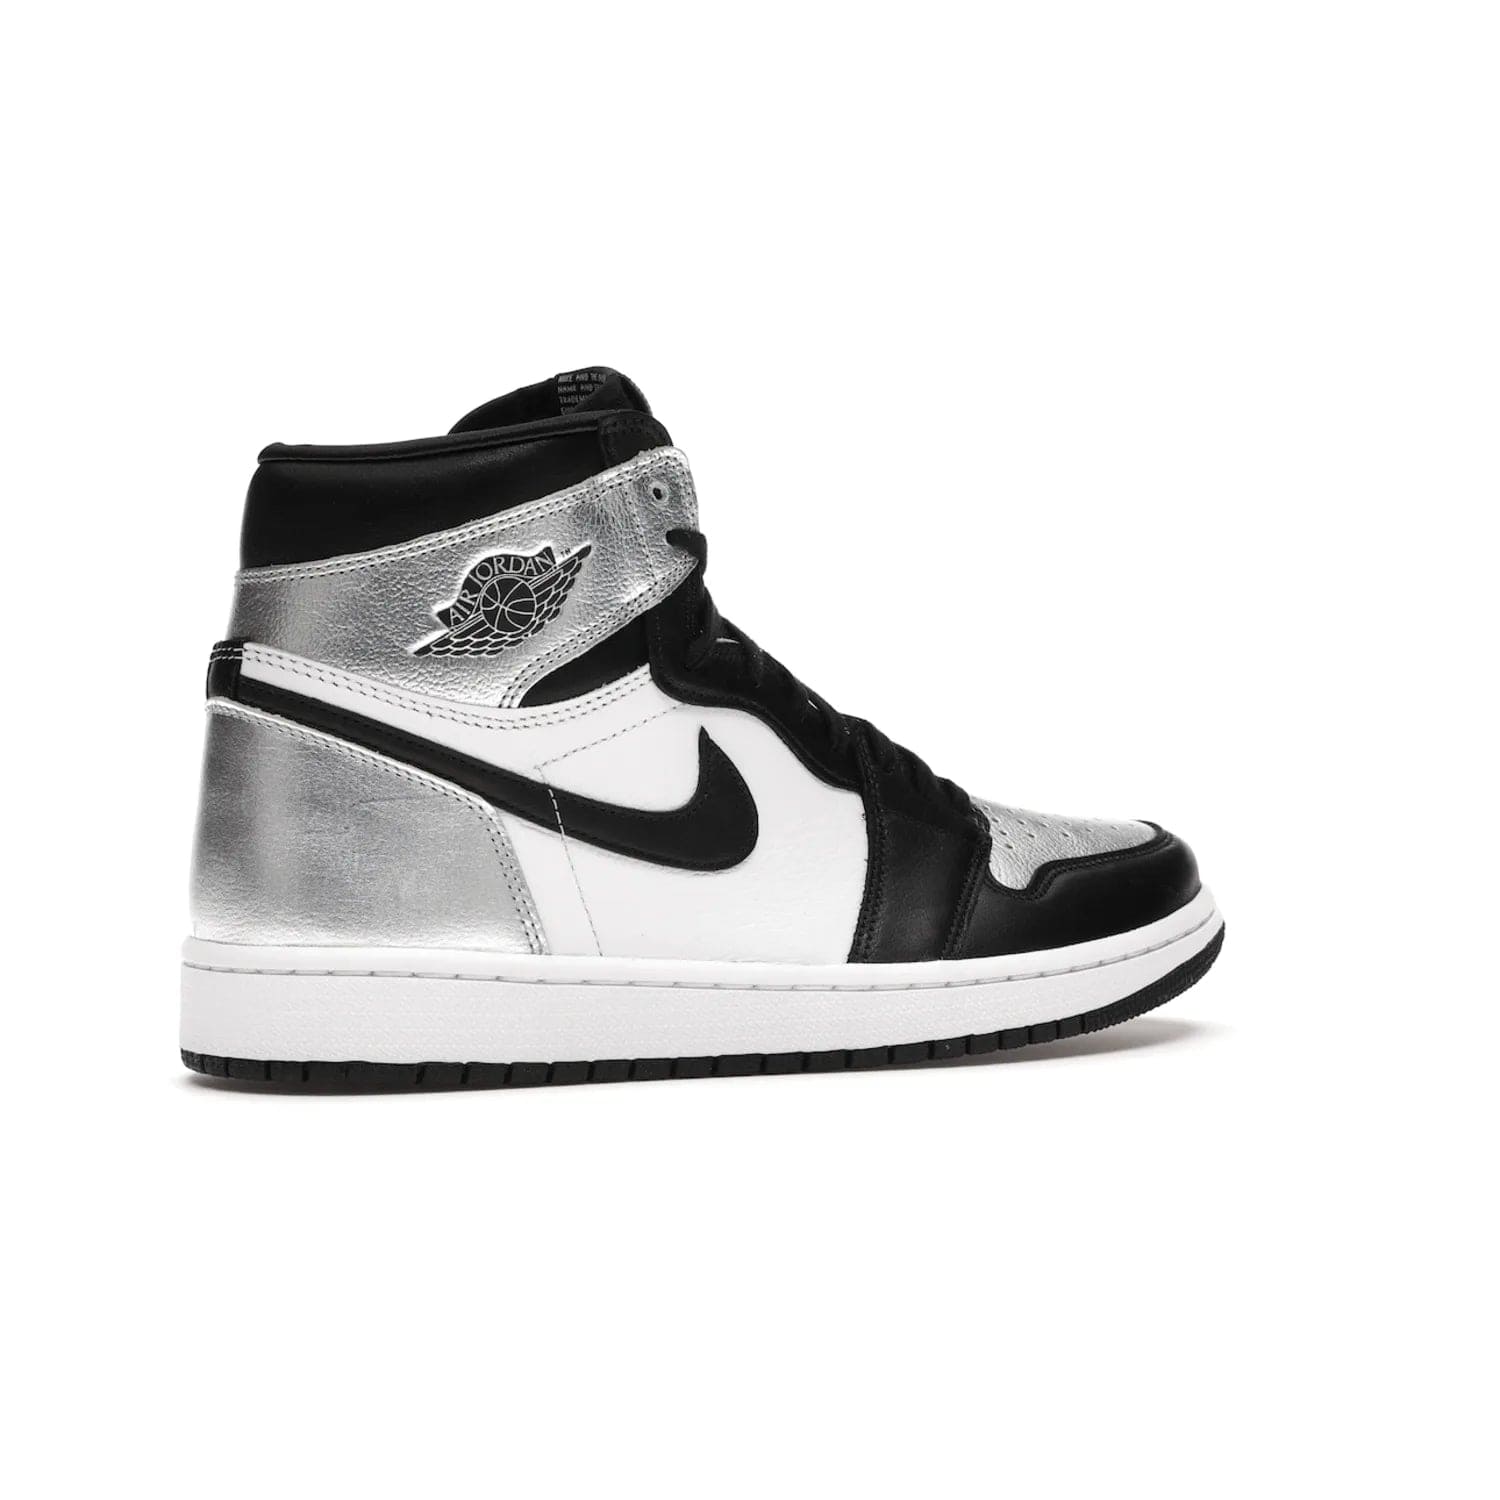 Jordan 1 Retro High Silver Toe (Women's) - Image 34 - Only at www.BallersClubKickz.com - Introducing the Jordan 1 Retro High Silver Toe (Women's): an updated spin on the iconic 'Black Toe' theme. Featuring white & black leather and silver patent leather construction. Nike Air branding, Air Jordan Wings logo, and white/black sole finish give a classic look. The perfect addition to an on-trend streetwear look. Available in classic black & white, this Jordan 1 is an instant classic. Released in February 20